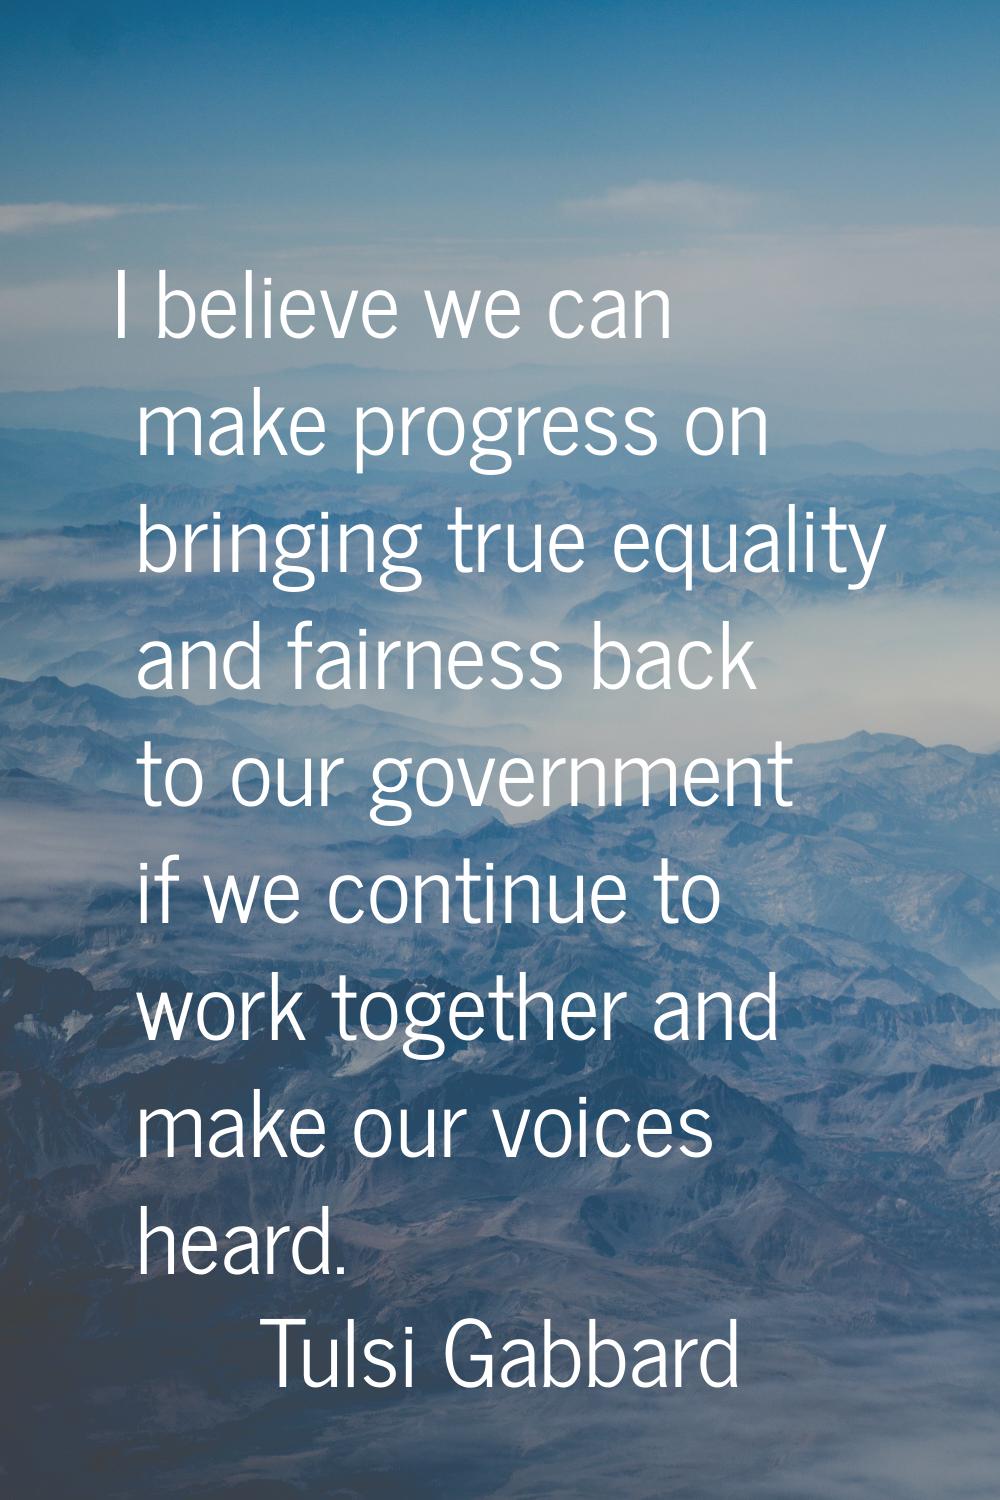 I believe we can make progress on bringing true equality and fairness back to our government if we 